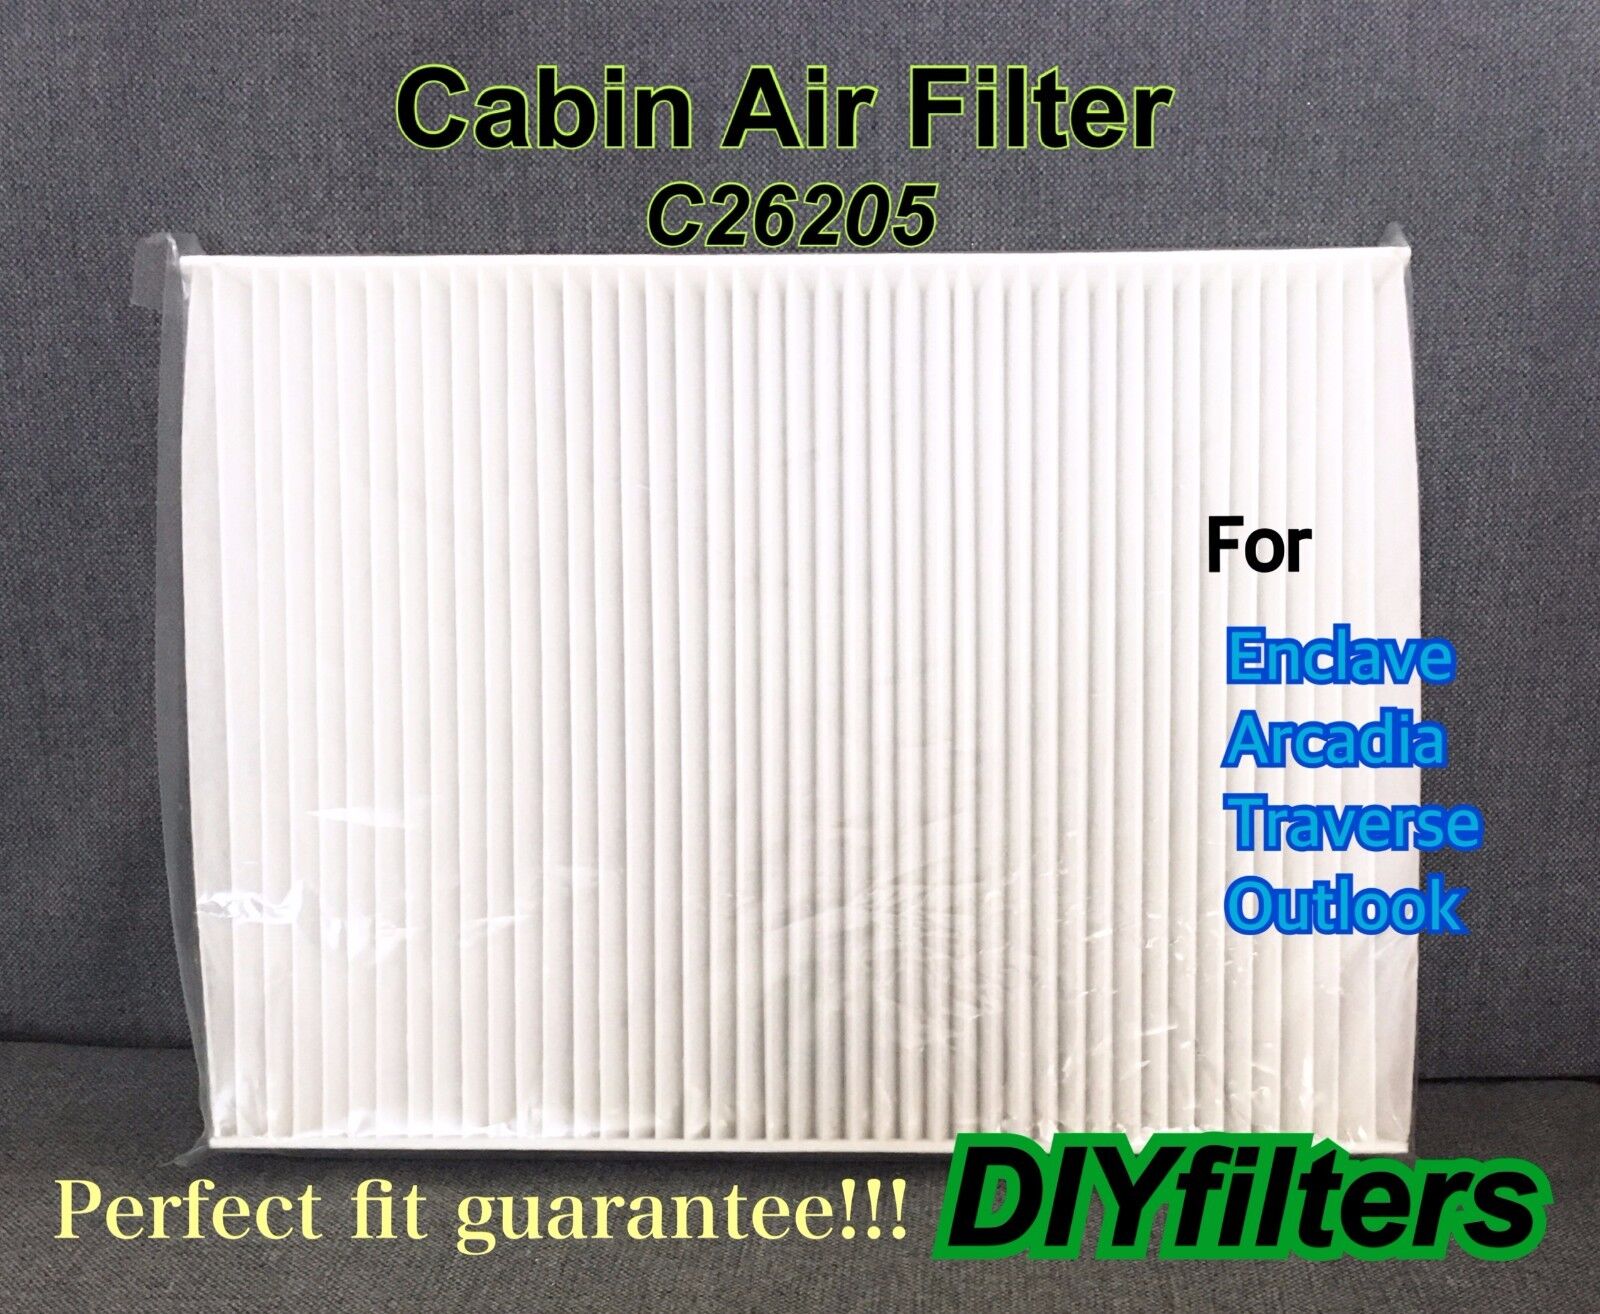 C26205 Premium CABIN AIR FILTER for 07-16 Acadia 08-17 Enclave Traverse Outlook